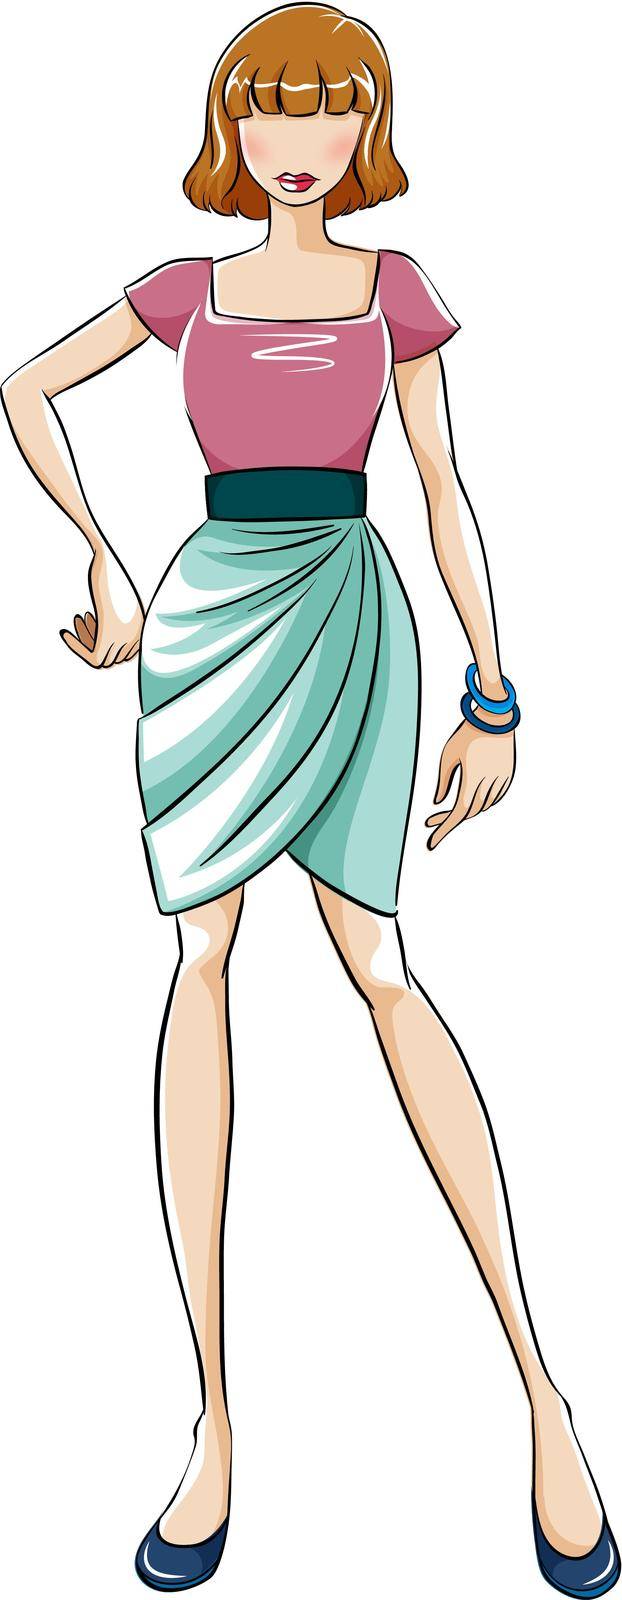 Sketch of a woman in pink top and blue skirt